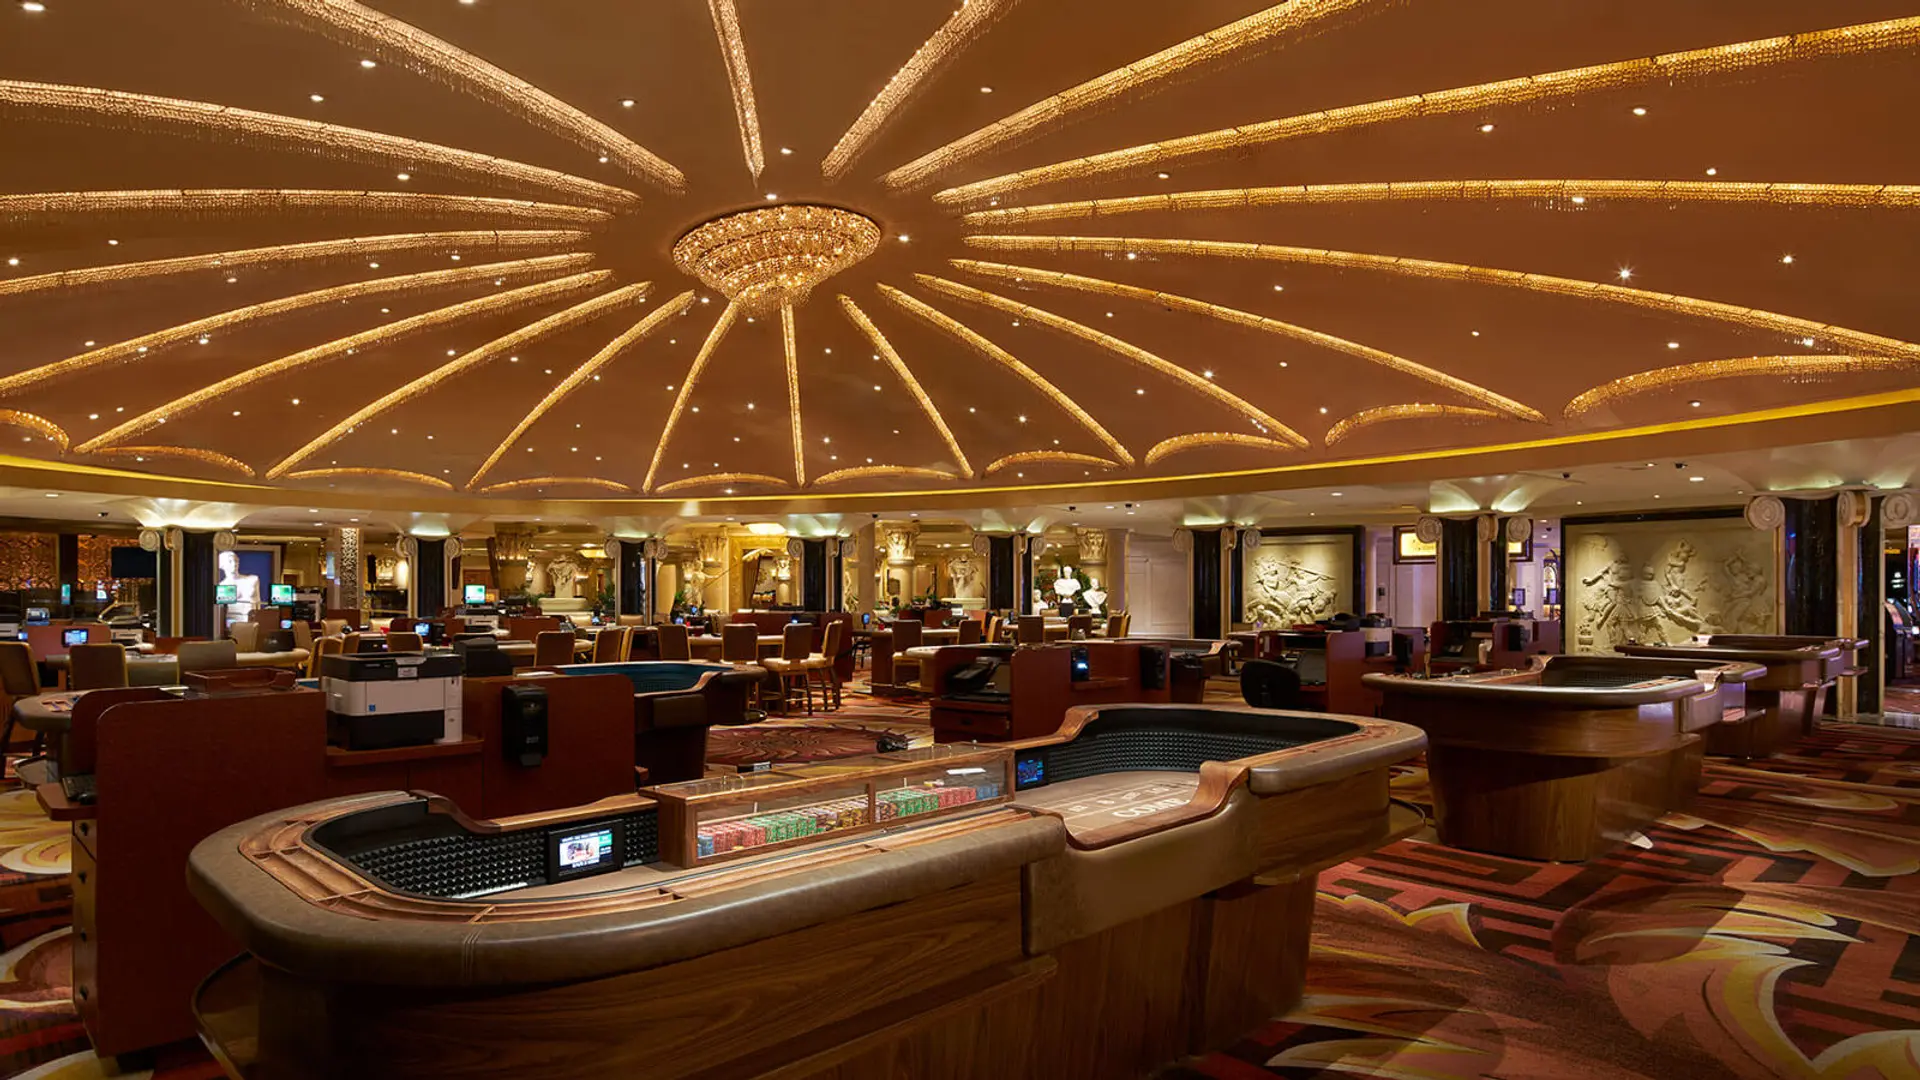 Casino with leather furniture, engraved statues in the walls, and a large golden lamp in ceiling.